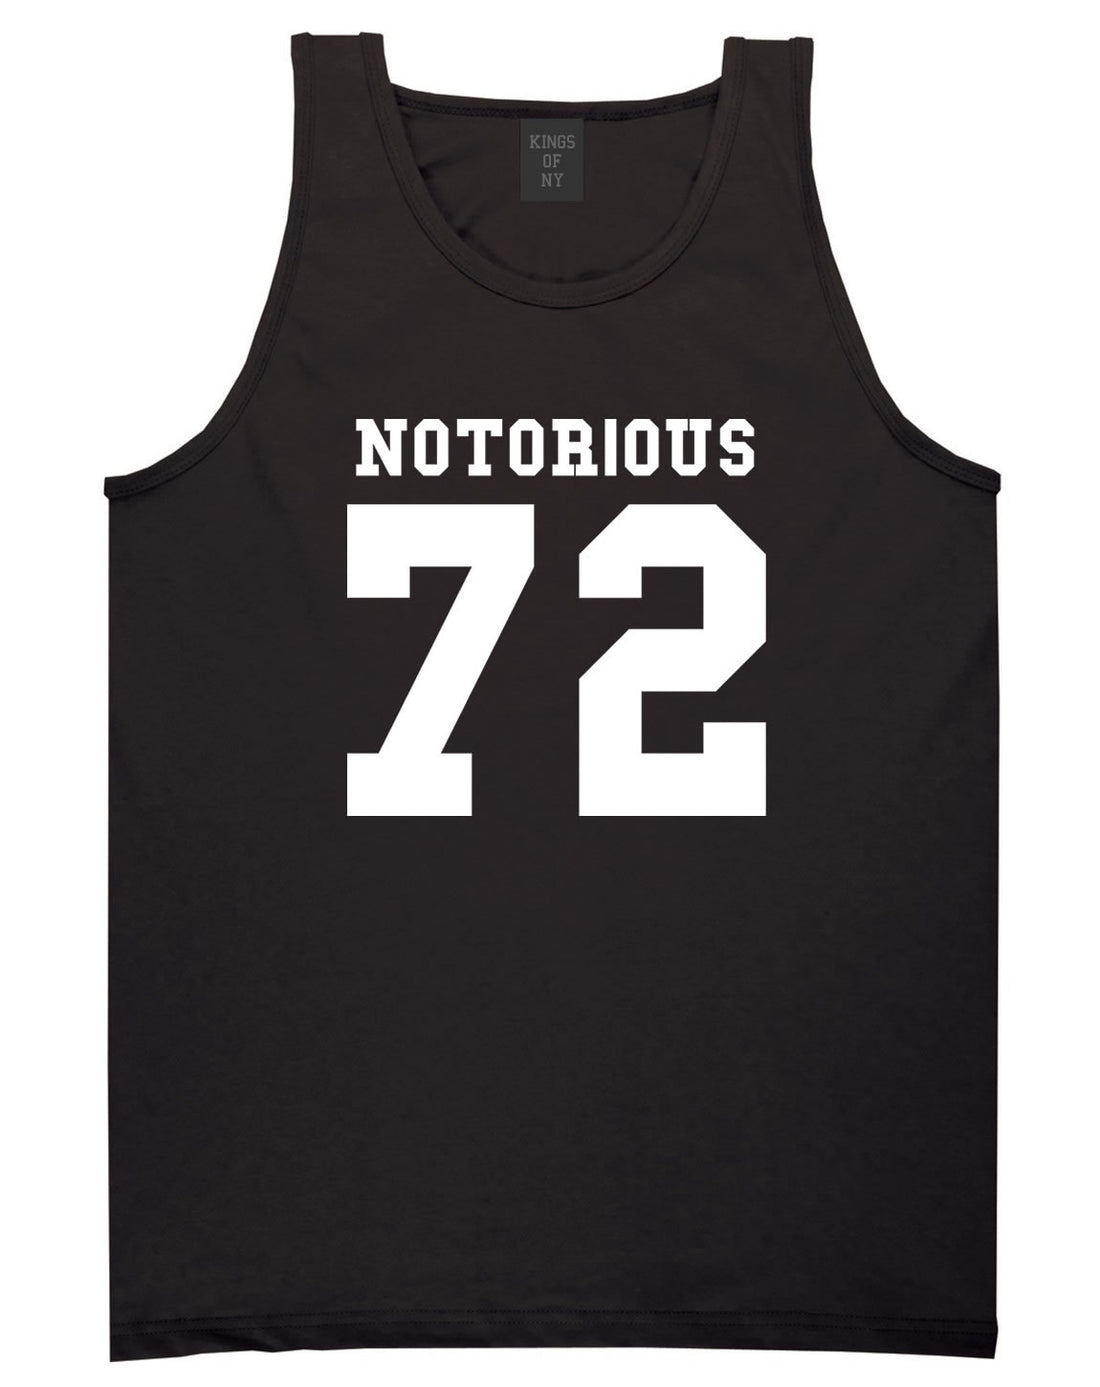 Notorious 72 Team Tank Top in Black by Kings Of NY